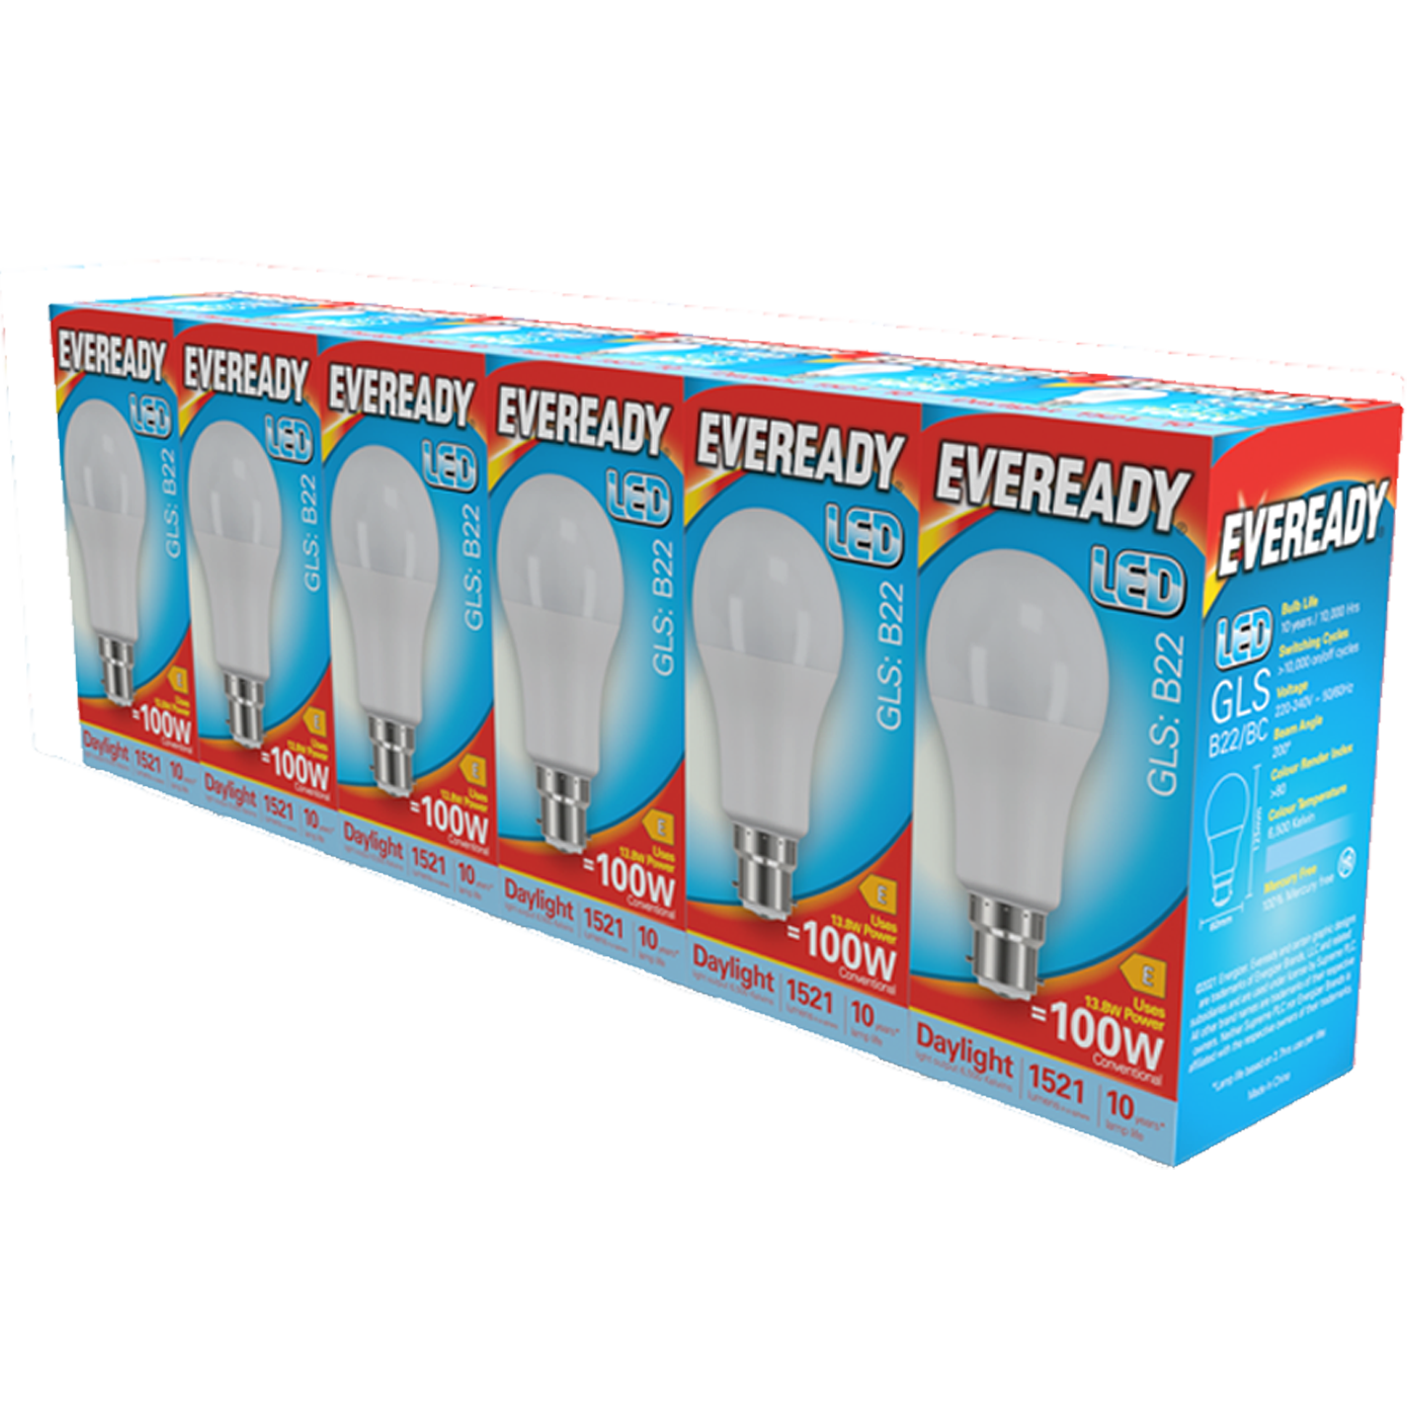 Eveready LED GLS B22 (BC) 1521lm 13.8W 6500K (Daylight) Pack of 5+1